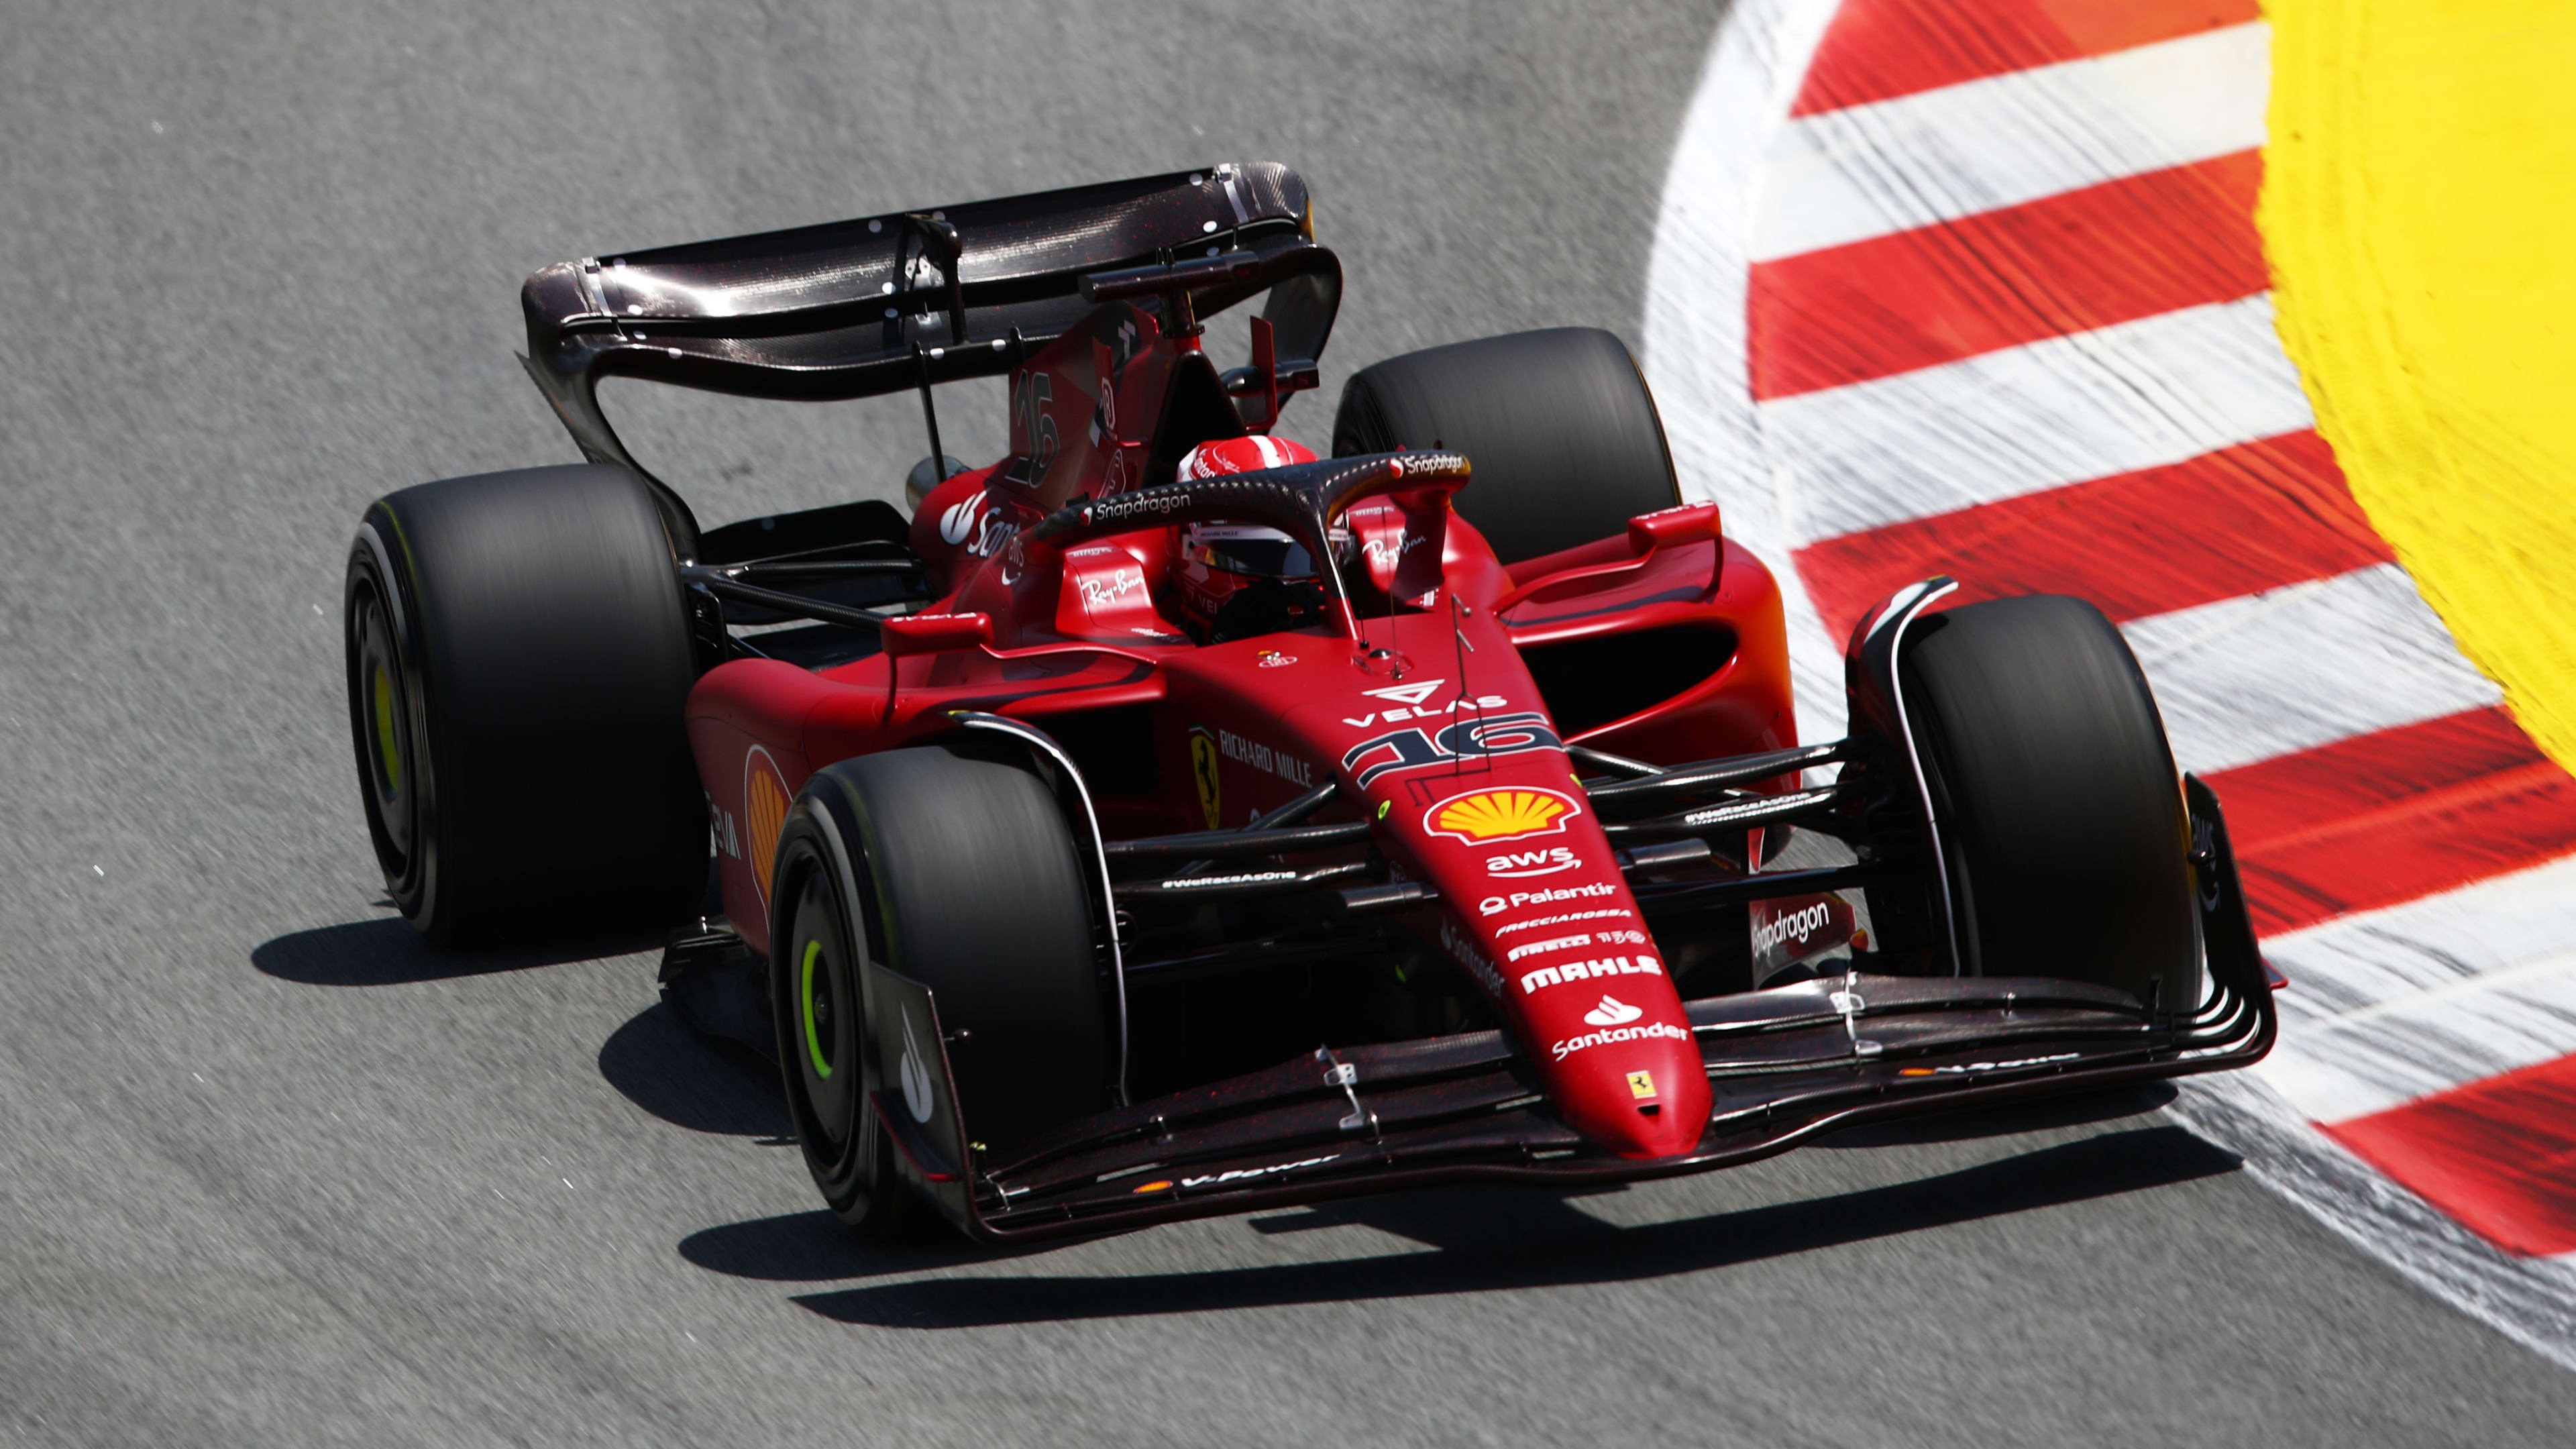 2022 Spanish Grand Prix FP1 report and highlights Leclerc leads Sainz and Verstappen as Ferrari begin Spanish GP weekend on the front foot Formula 1®